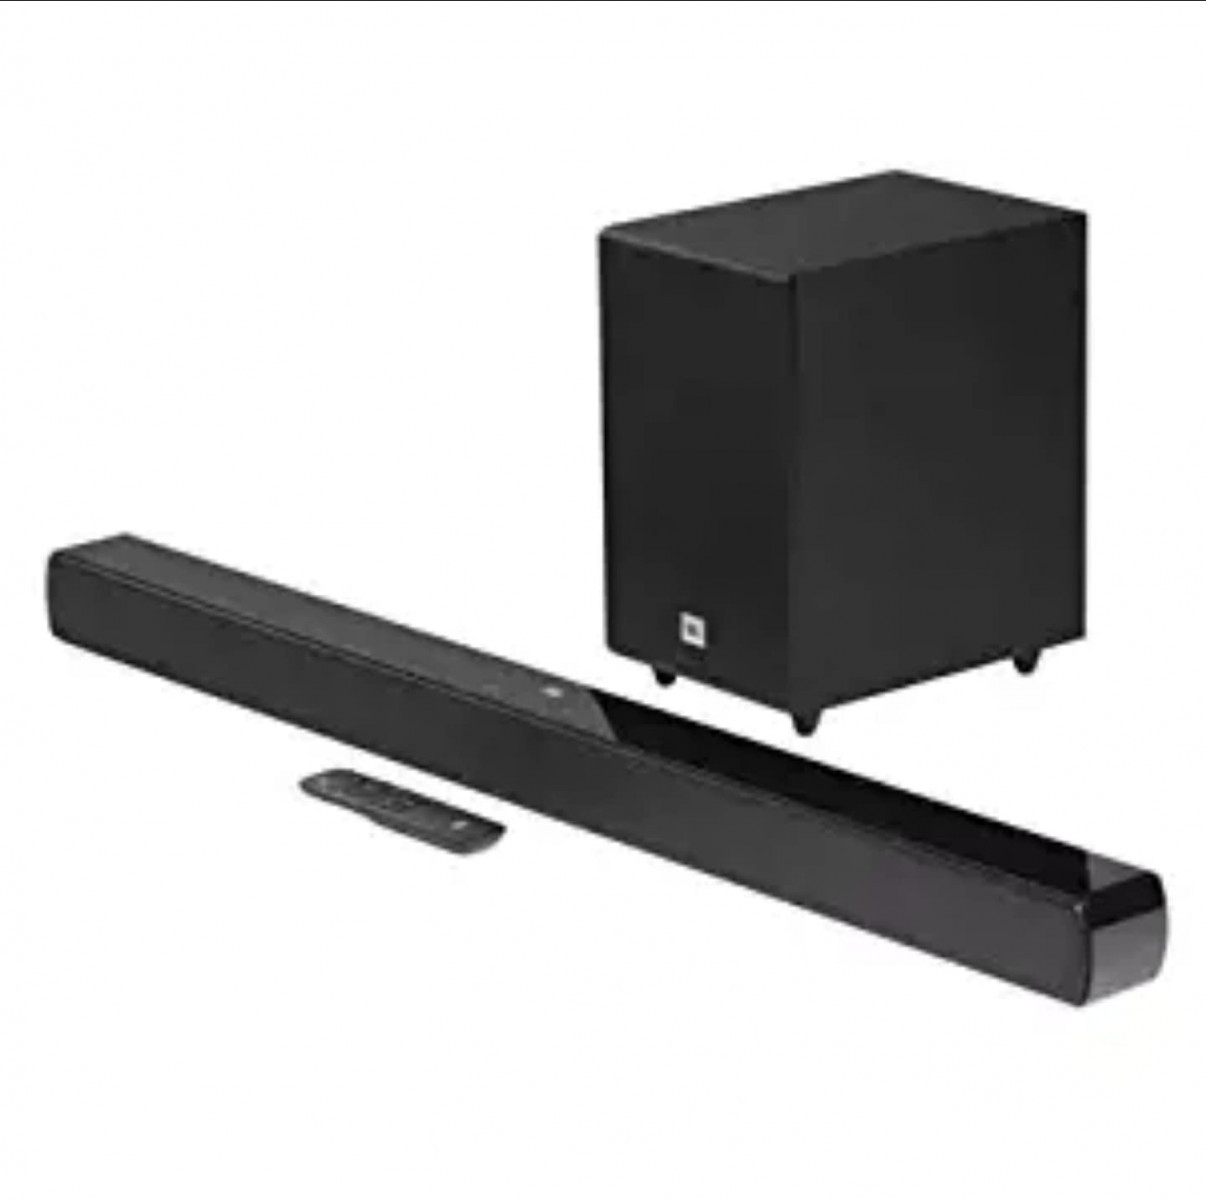 JBL Cinema SB140 with 110W Power Output Dolby Digital Embedded Wired Subwoofer for Extra Deep Bass Wireless Music Streaming via Bluetooth